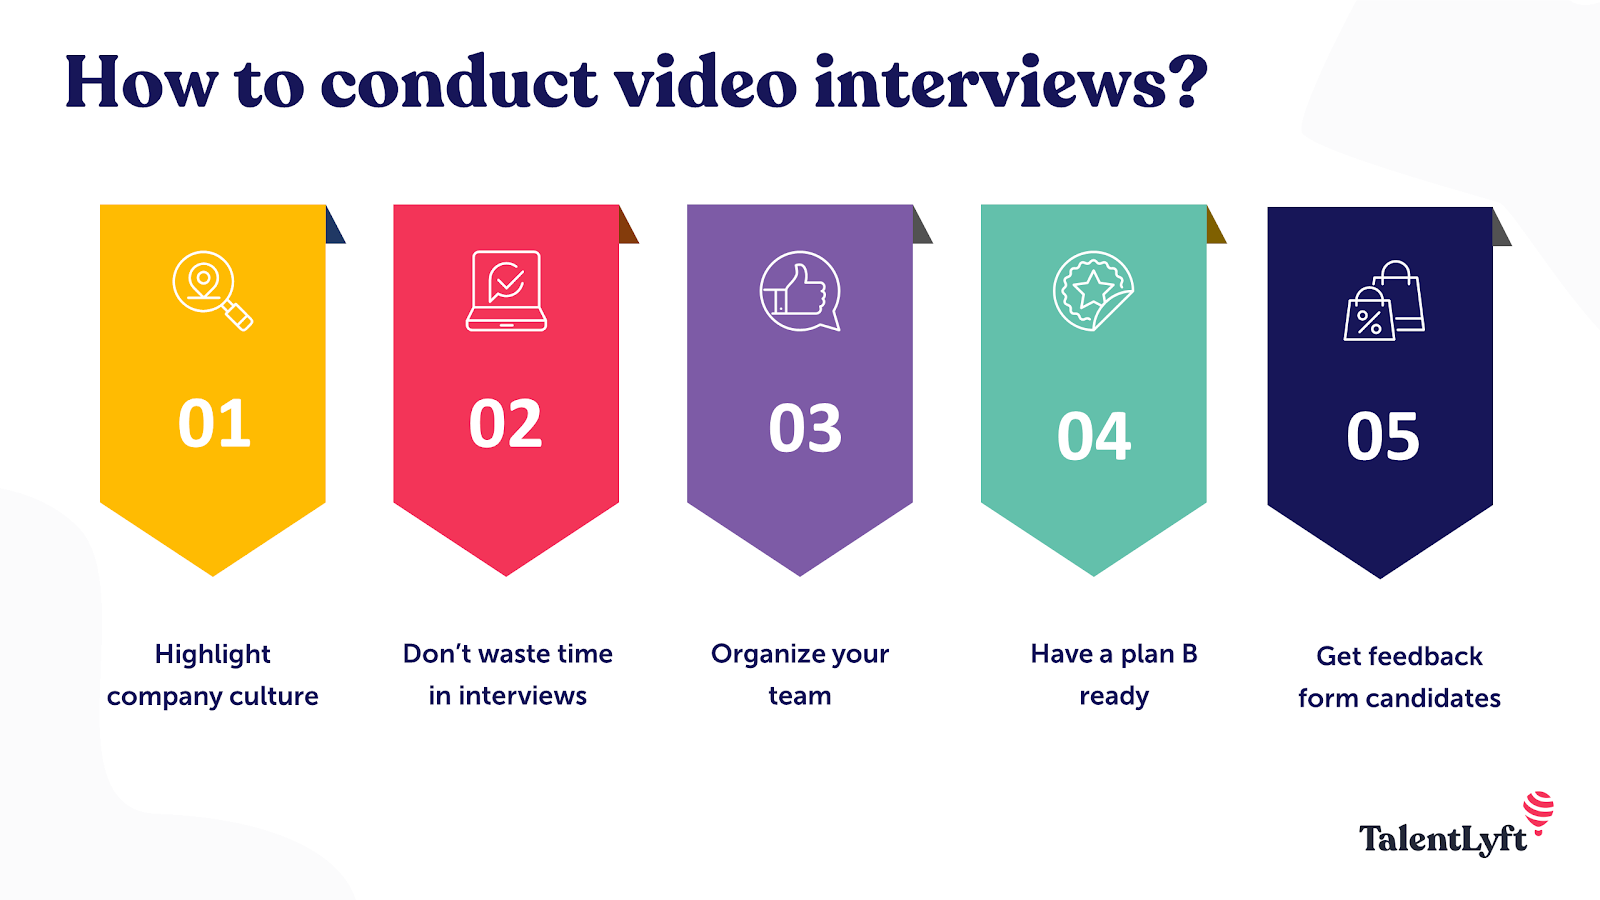 How to conduct video interviews